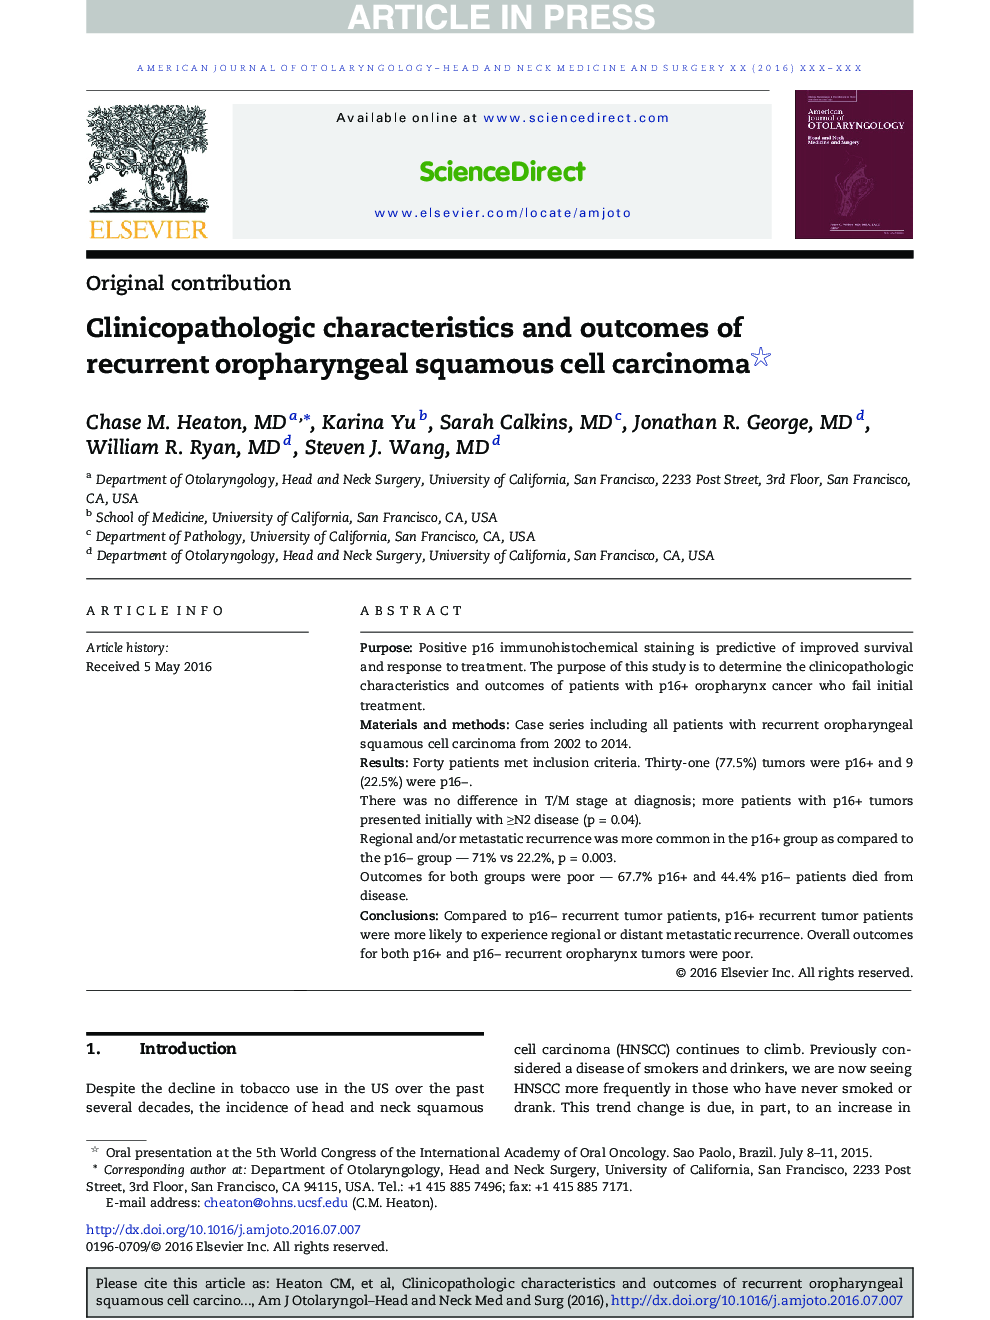 Clinicopathologic characteristics and outcomes of recurrent oropharyngeal squamous cell carcinoma